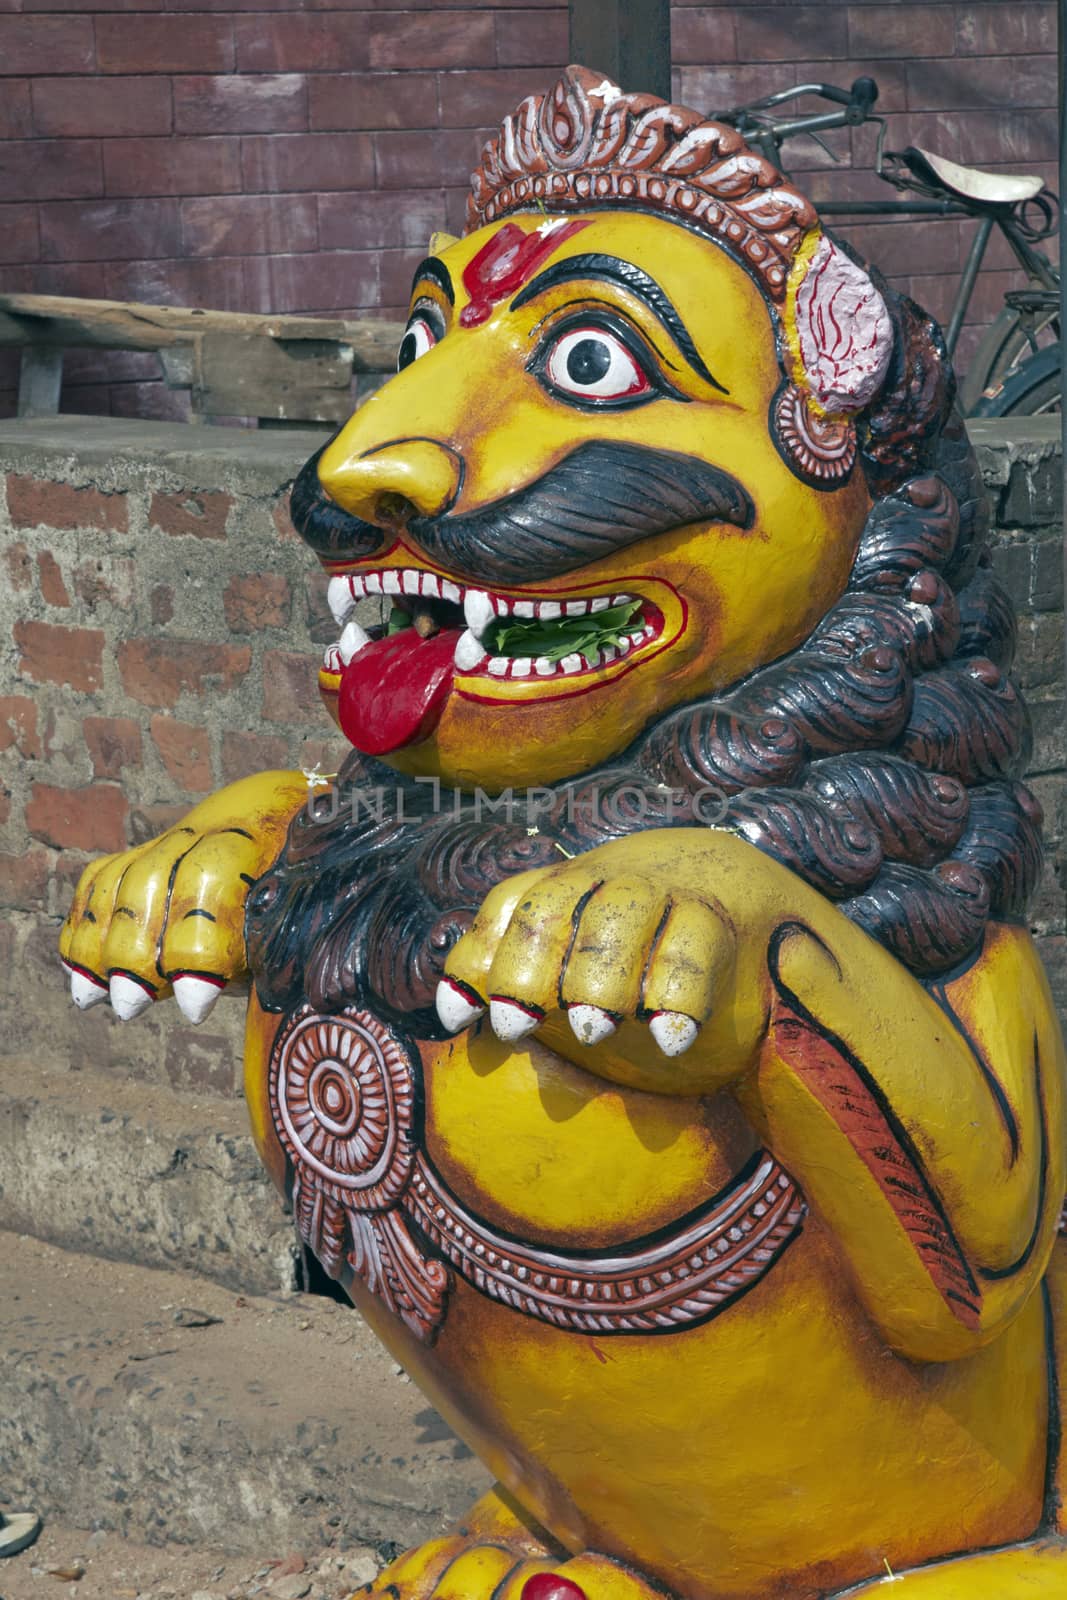 Statue of a lion guarding the entrance to the Lingaraja Hindu Temple in Bhubaneswar, Orissa, India.